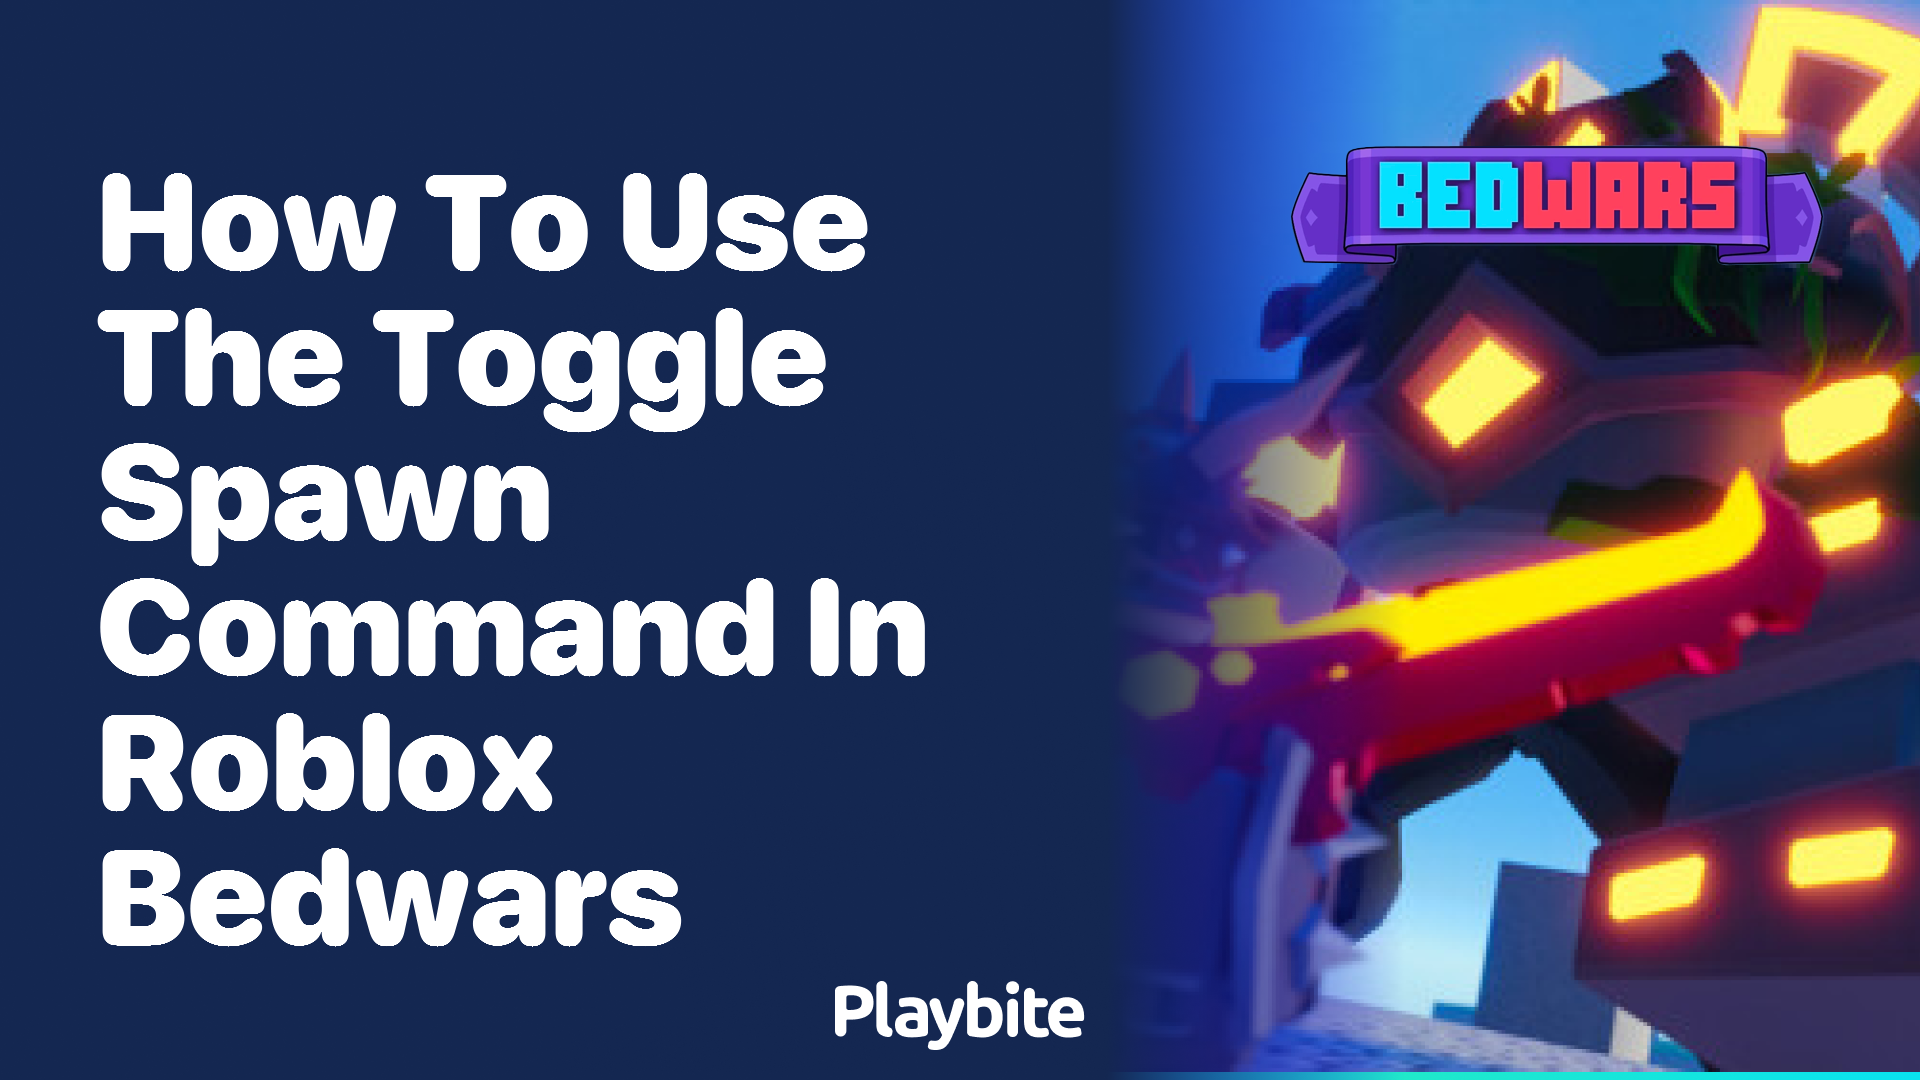 How to Use the Toggle Spawn Command in Roblox Bedwars